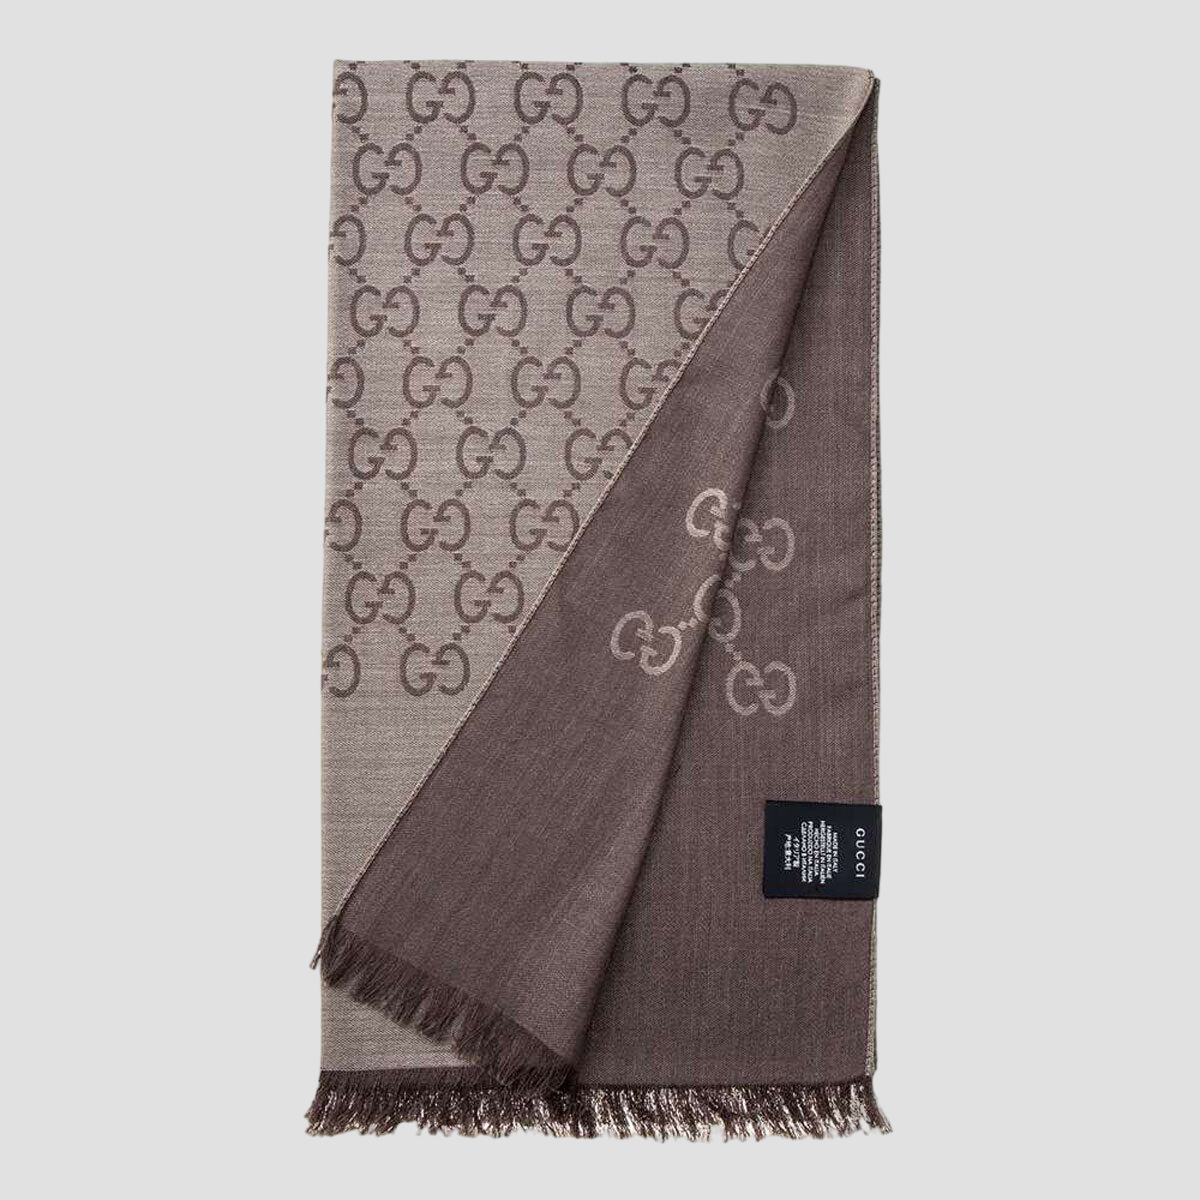 GUCCI SCARF LIGHT BROWN AND DARK BROWN 165904 3G646 9664